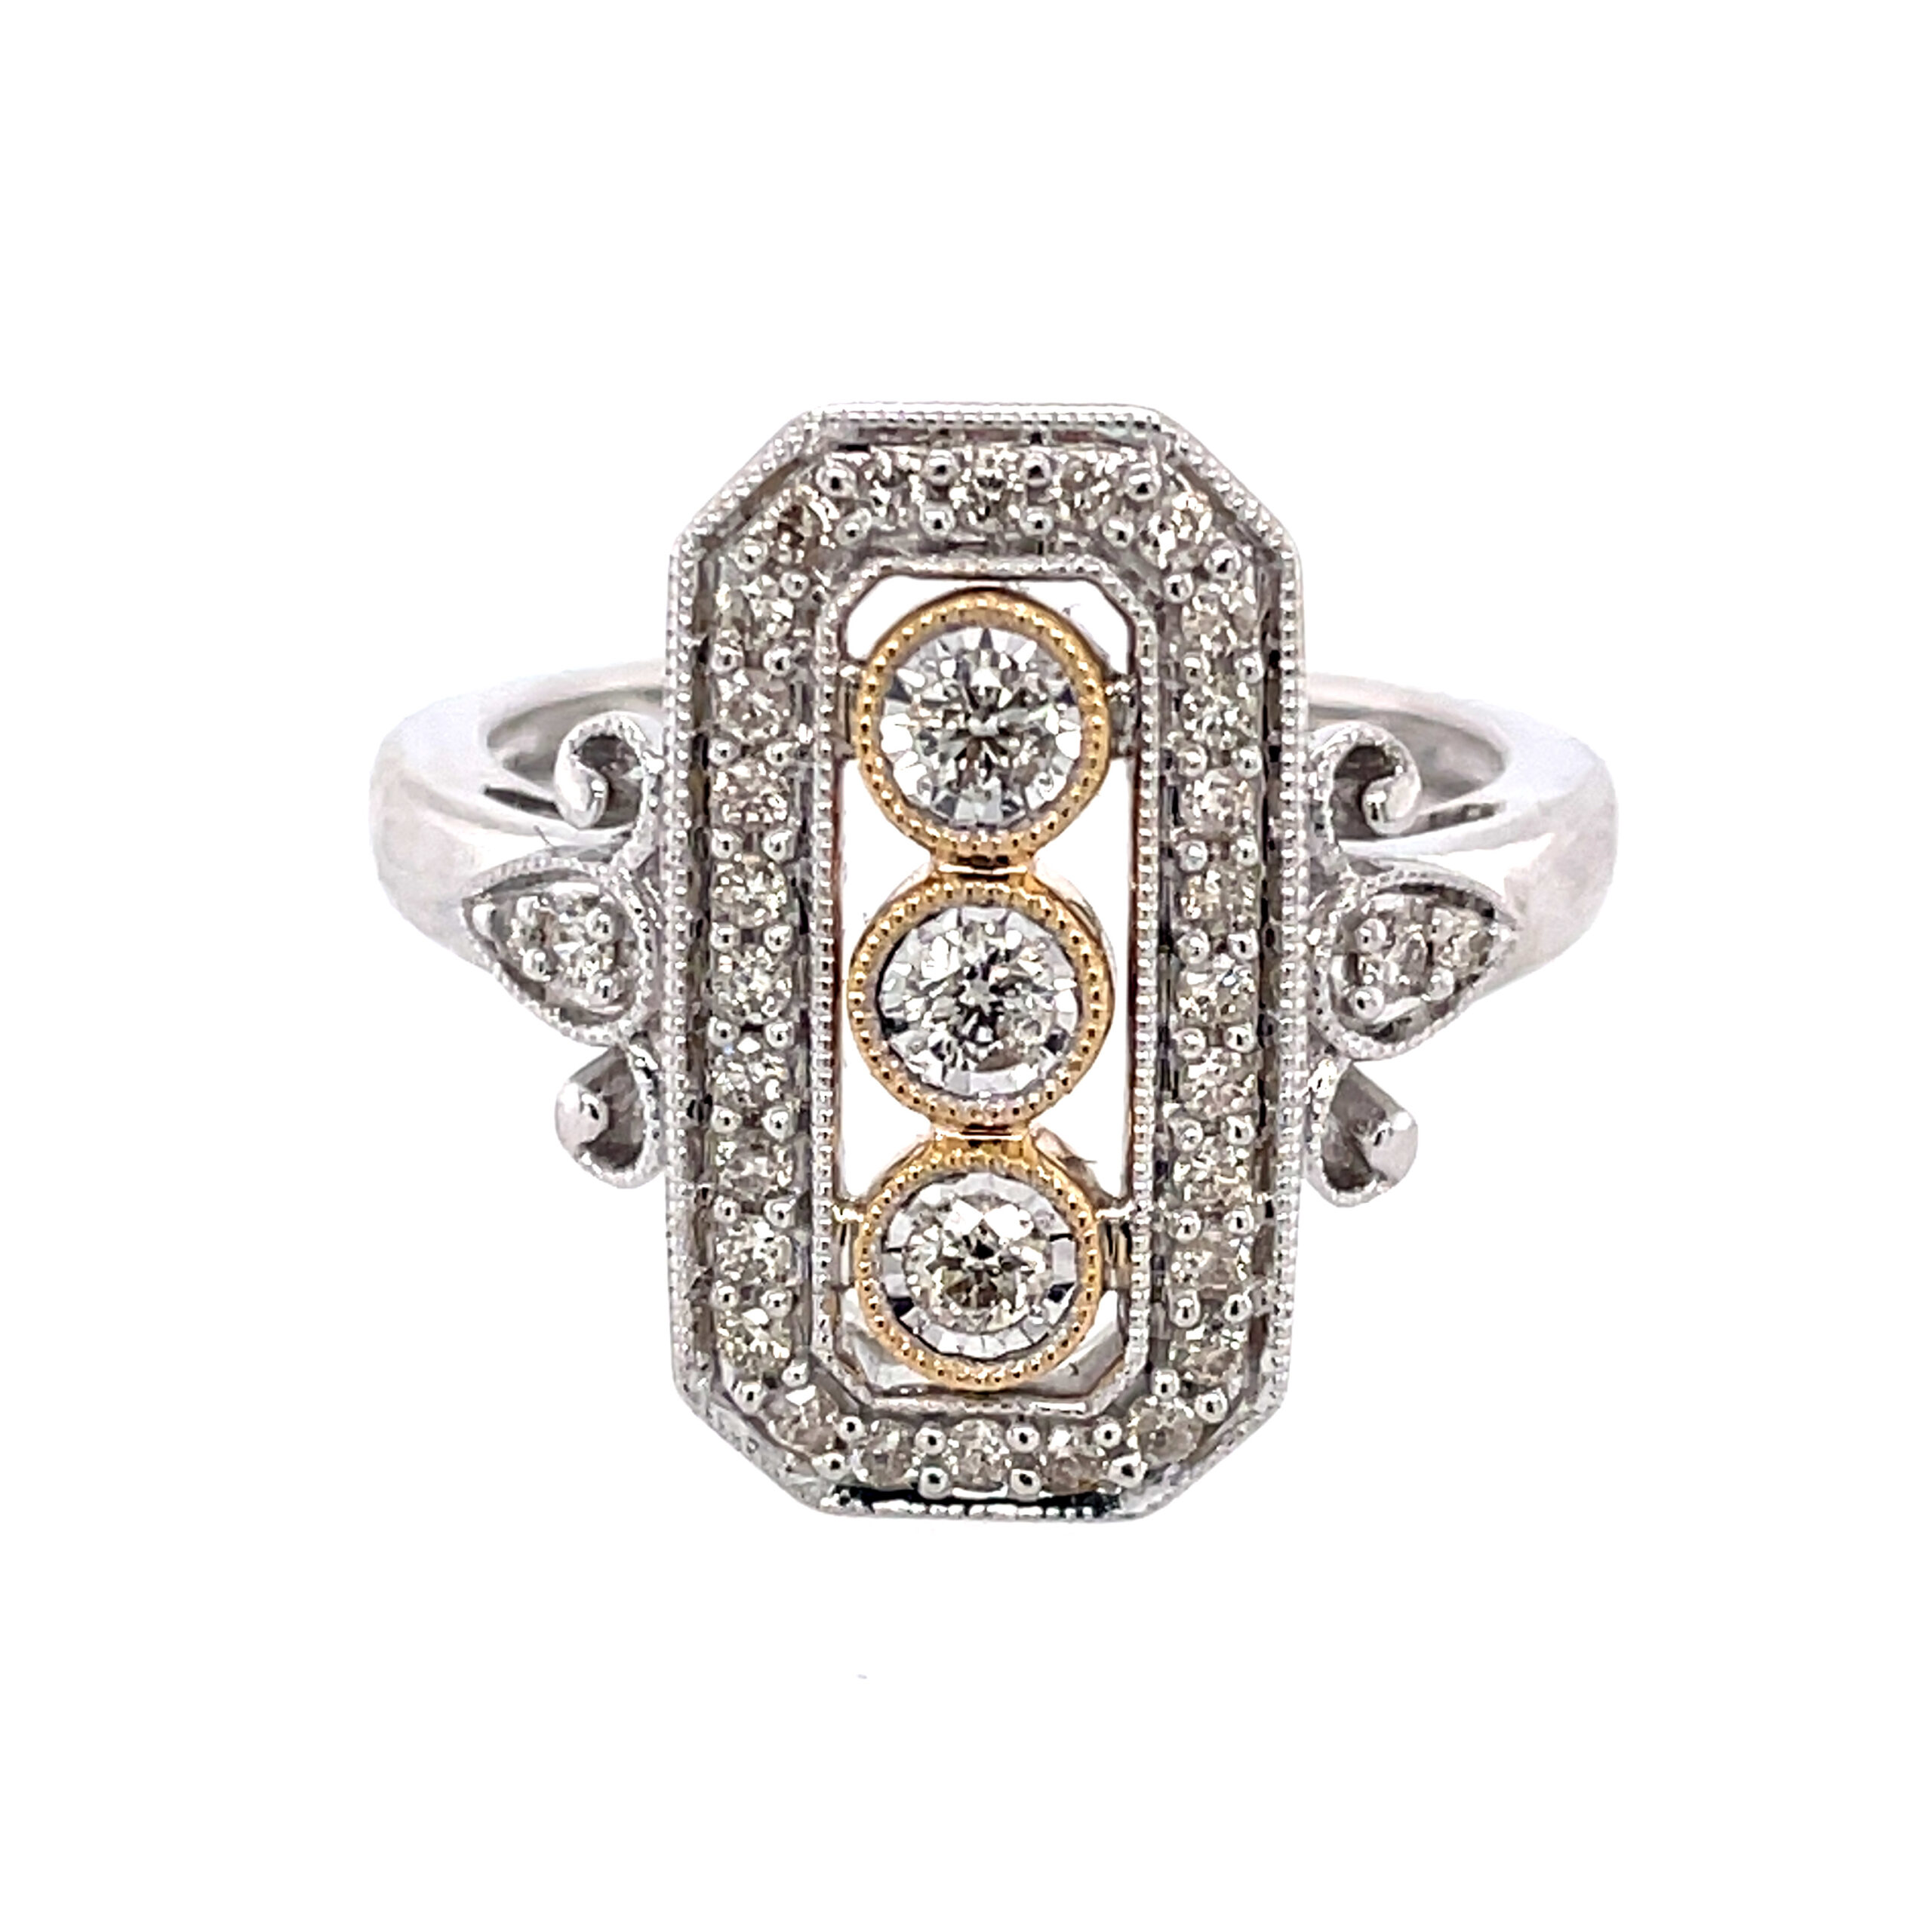 Two Toned Antique Style Diamond Ring